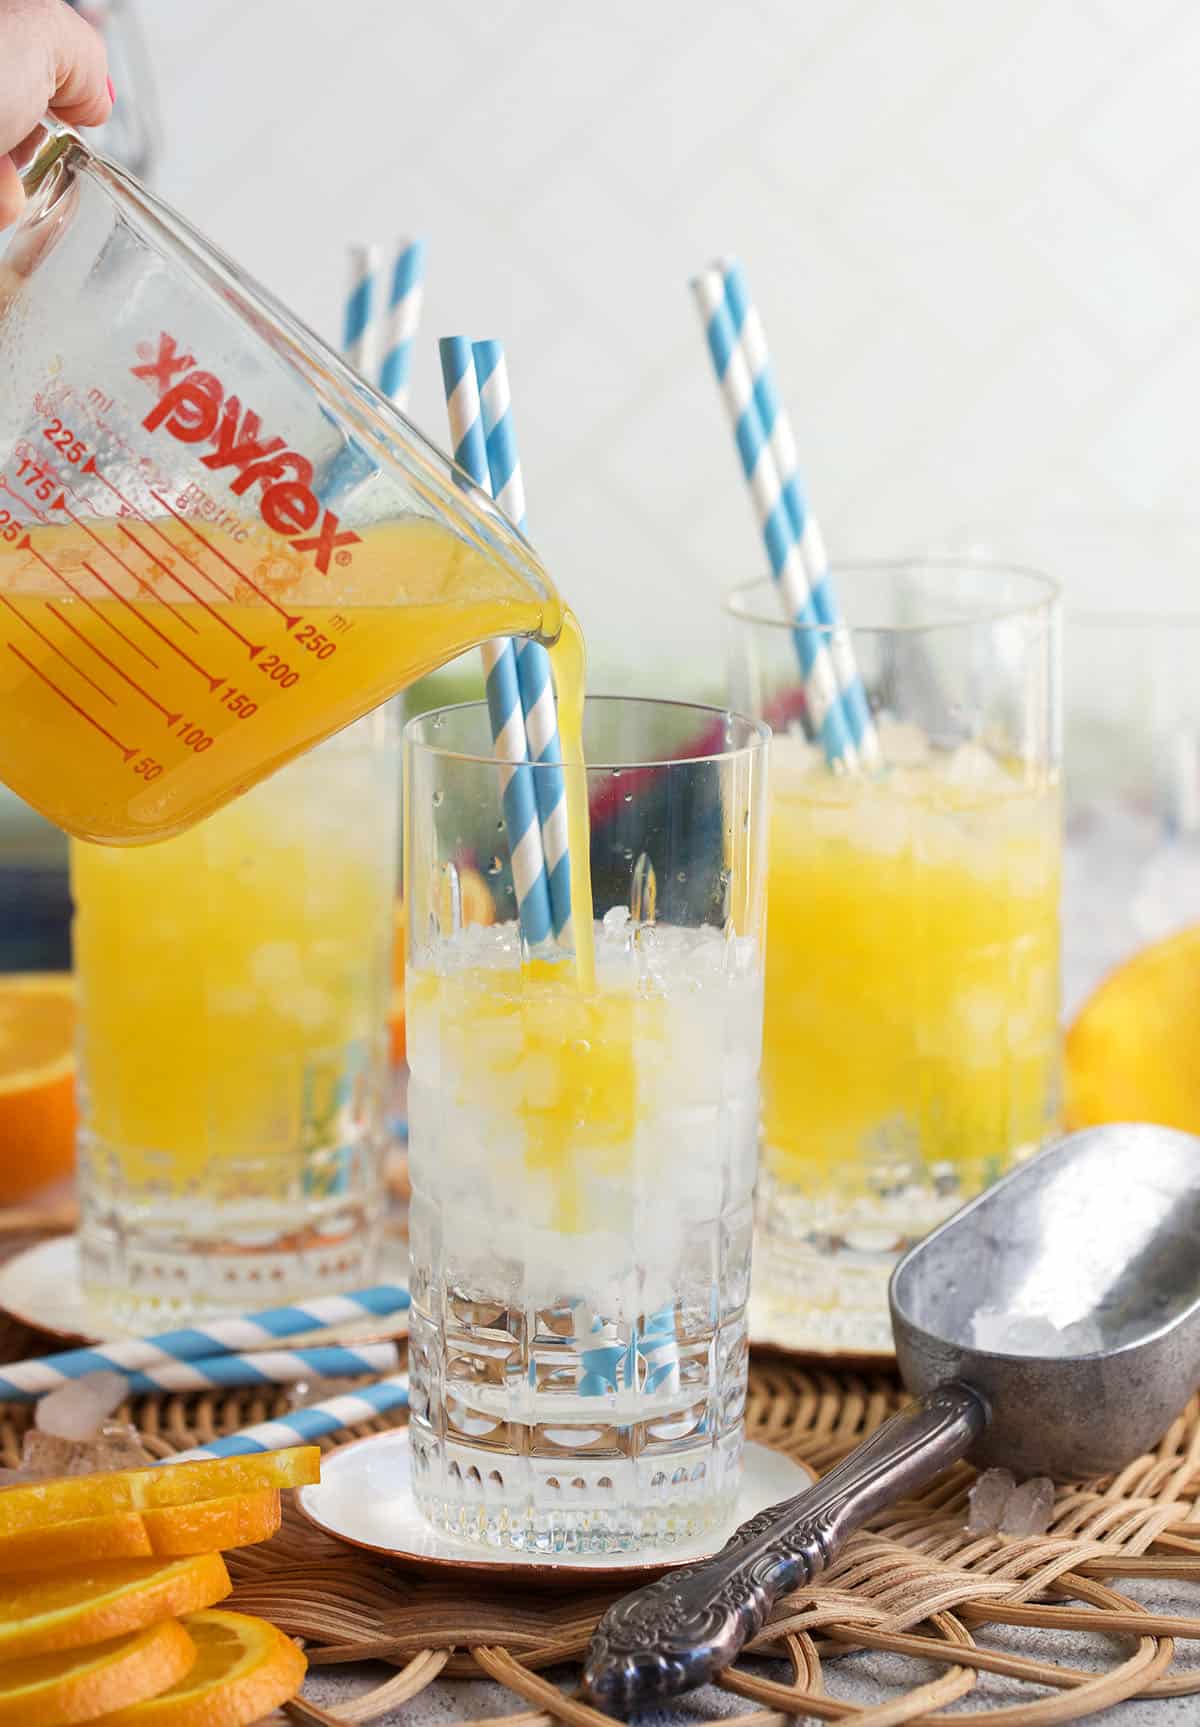 Orange juice being poured over ice in a collins glass.